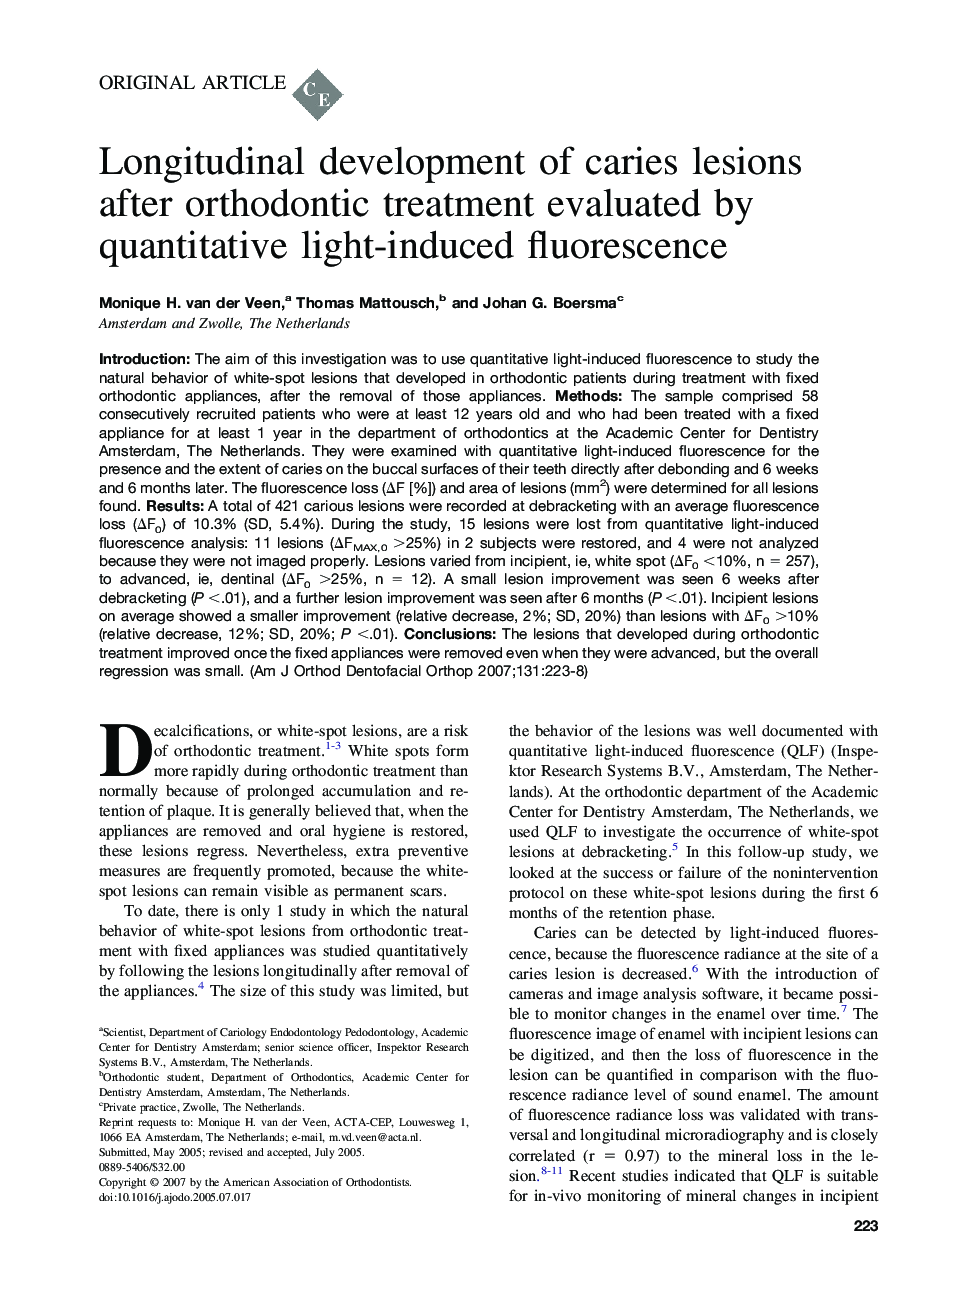 Longitudinal development of caries lesions after orthodontic treatment evaluated by quantitative light-induced fluorescence